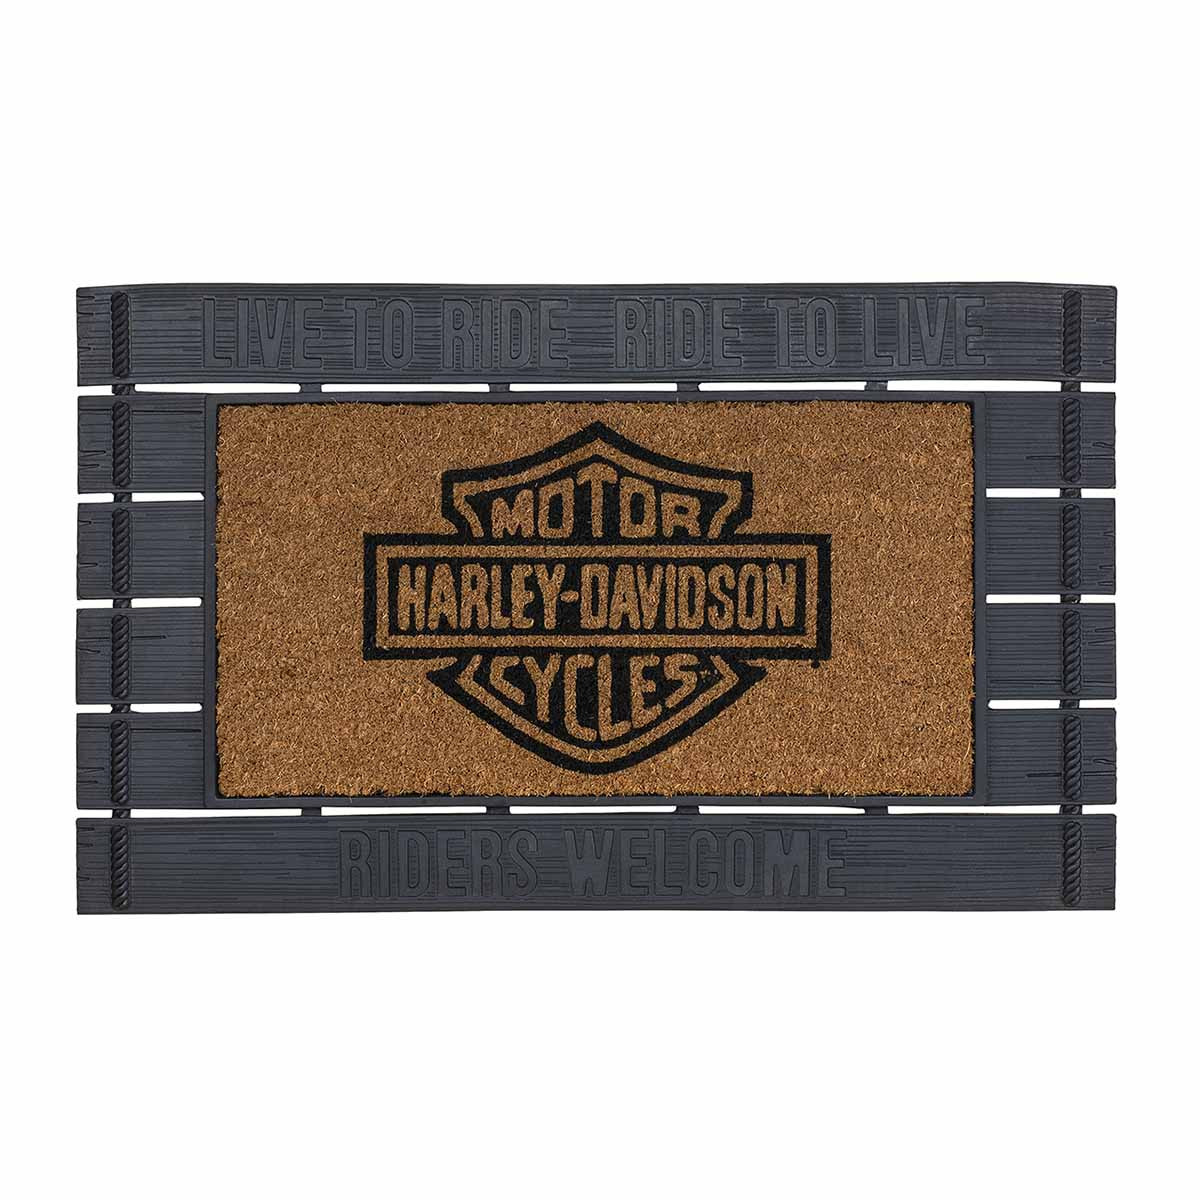 HARLEY DAVIDSON RIDERS WELCOME ENTRY MAT